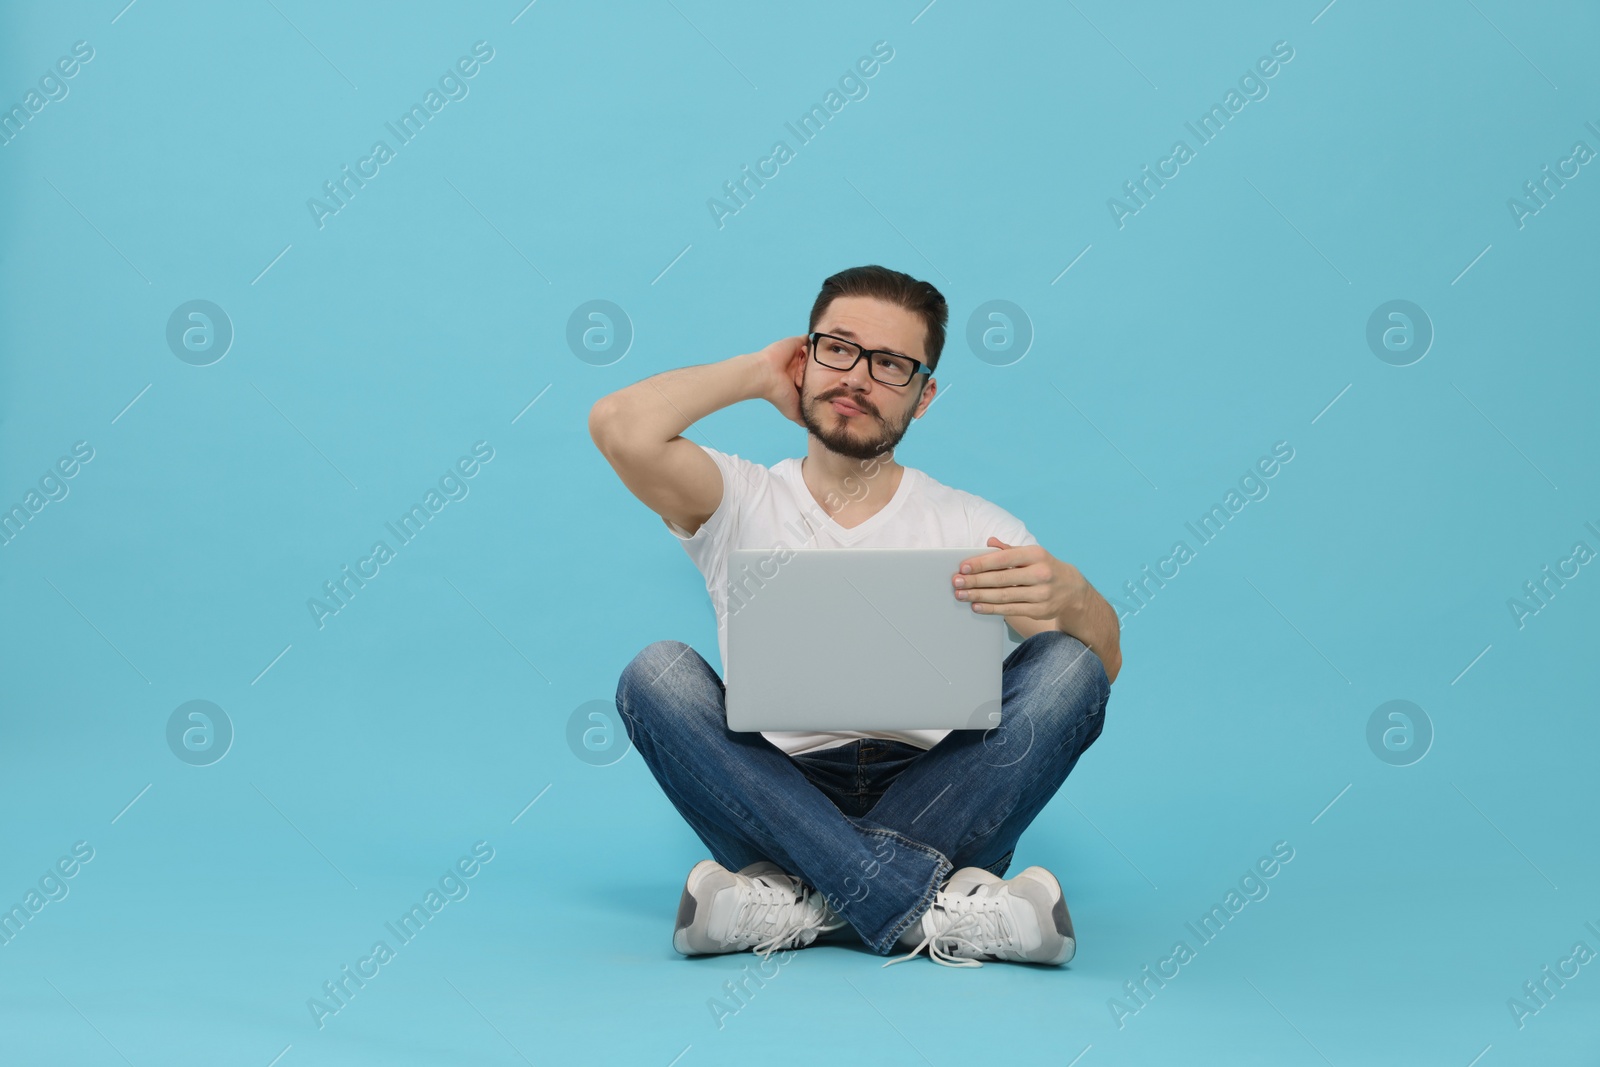 Photo of Pensive man sitting and using laptop on light blue background